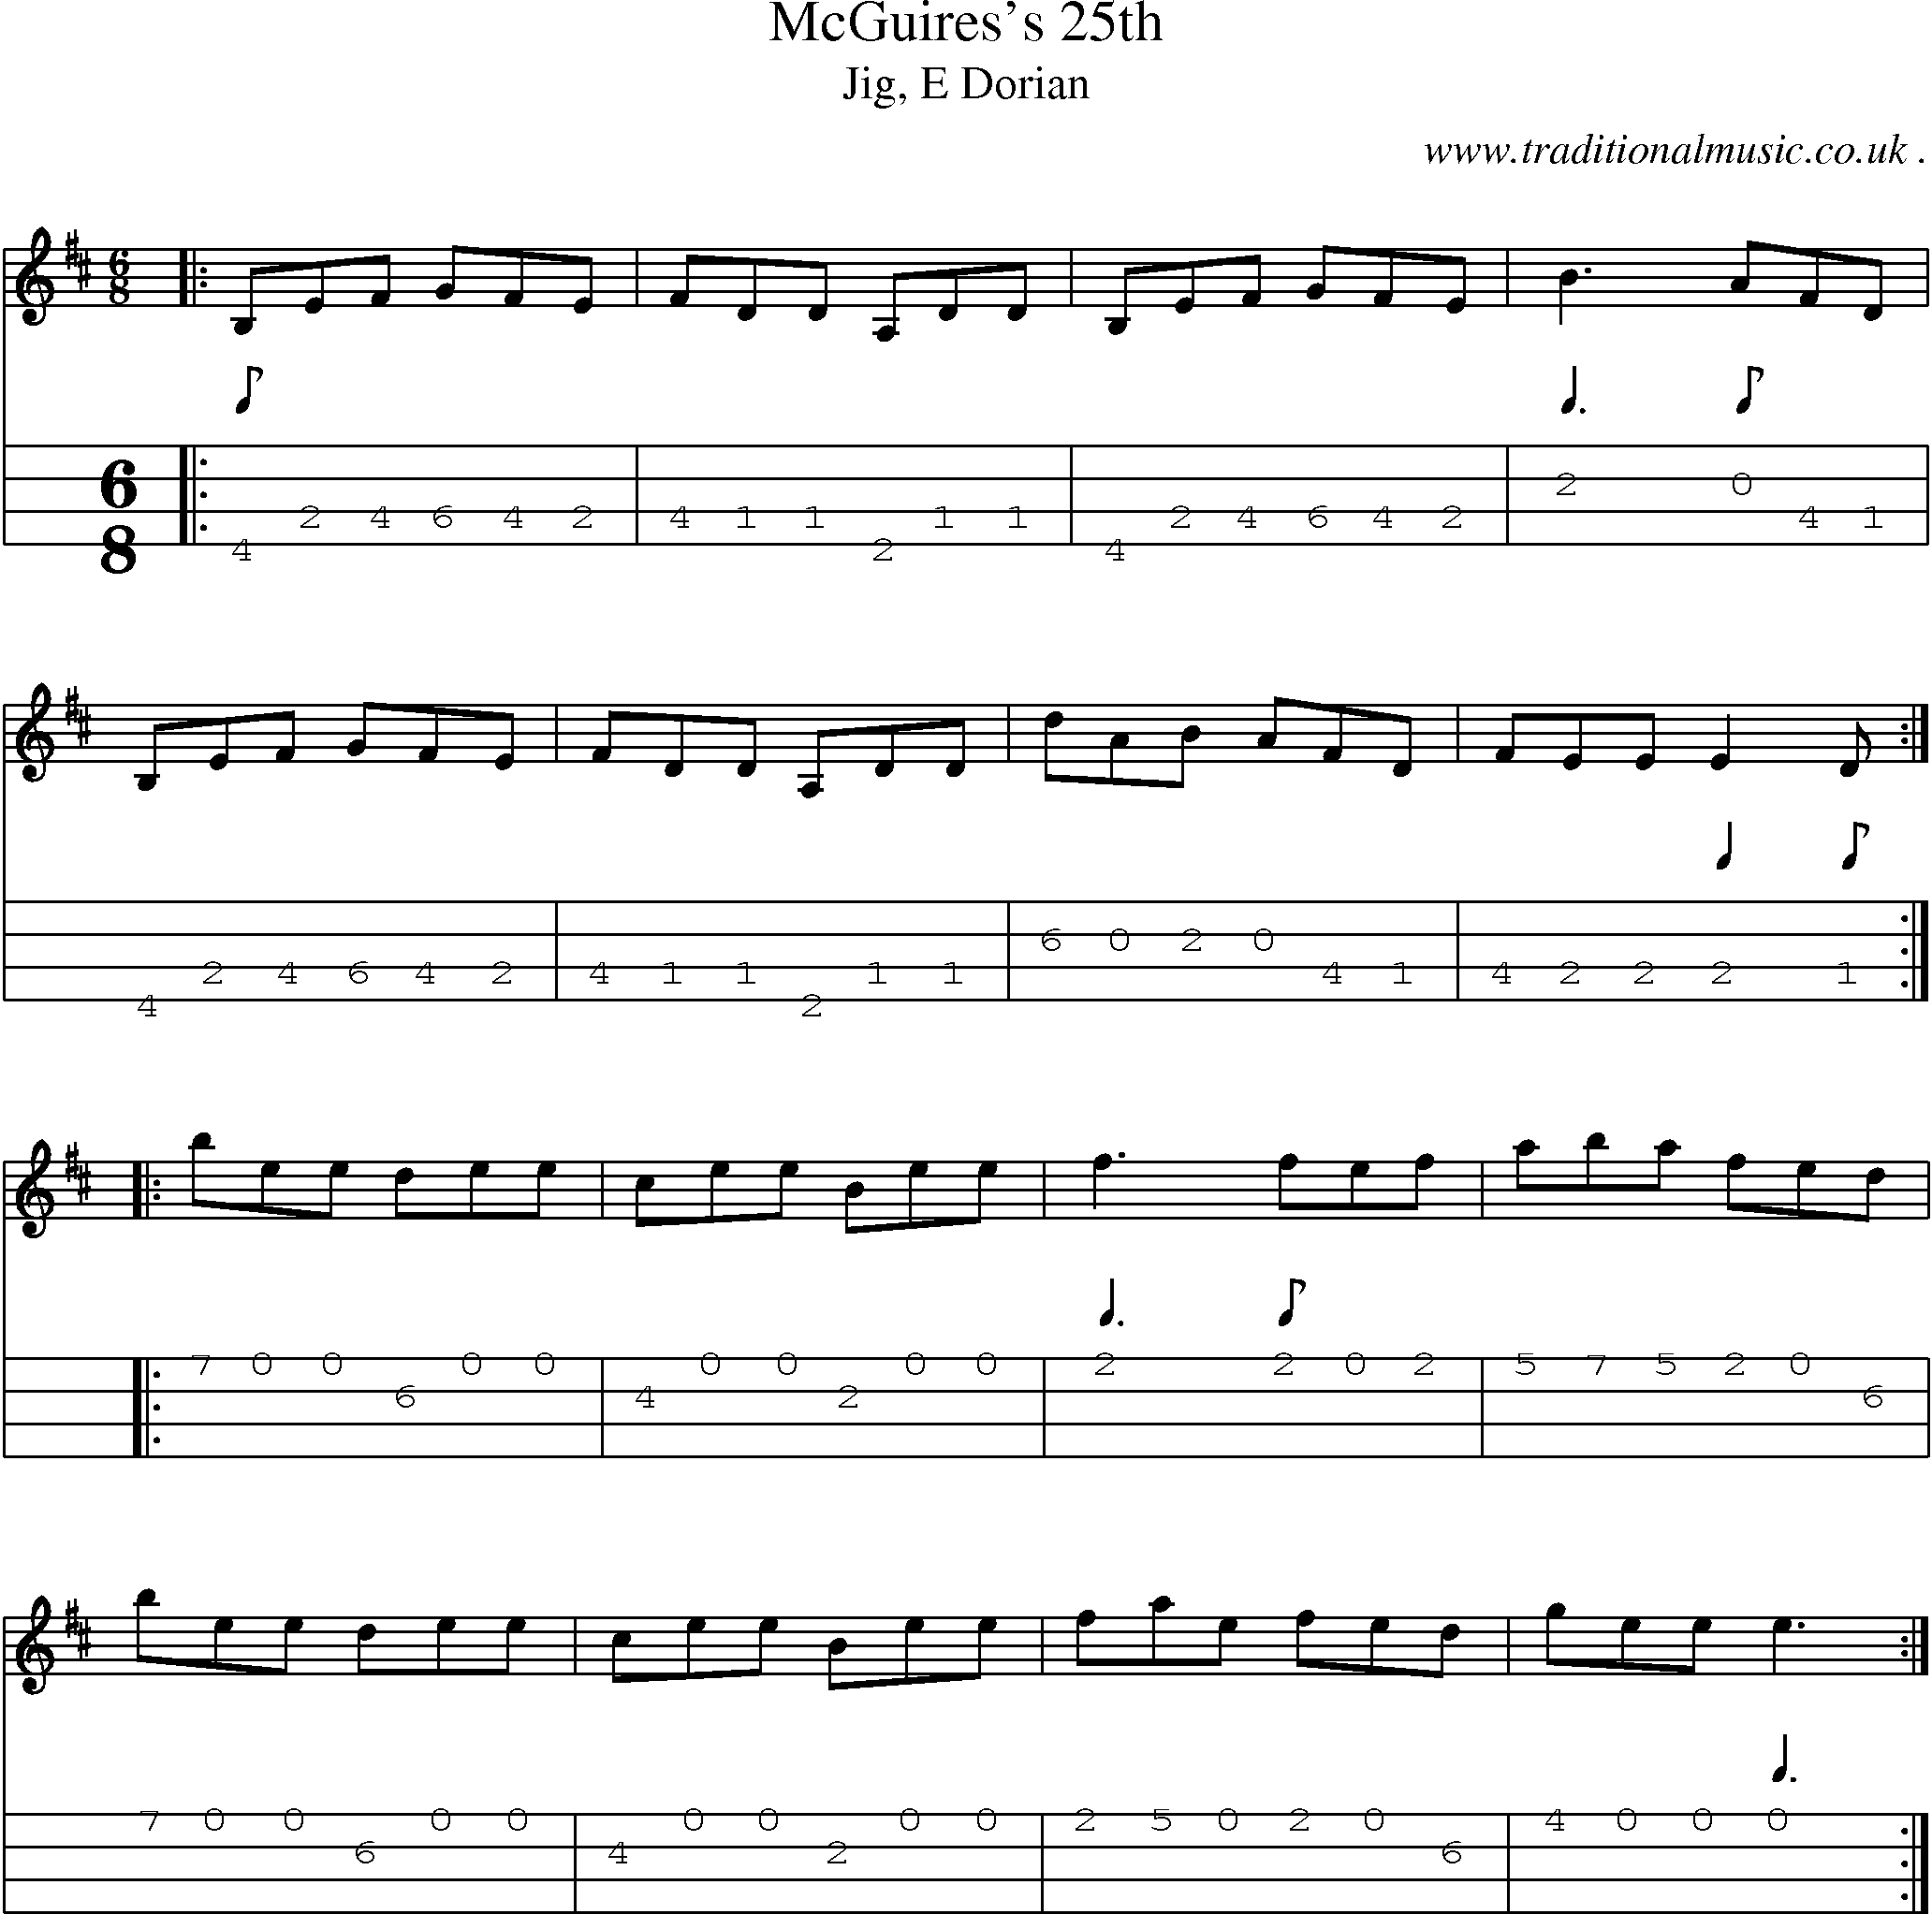 Sheet-music  score, Chords and Mandolin Tabs for Mcguiress 25th